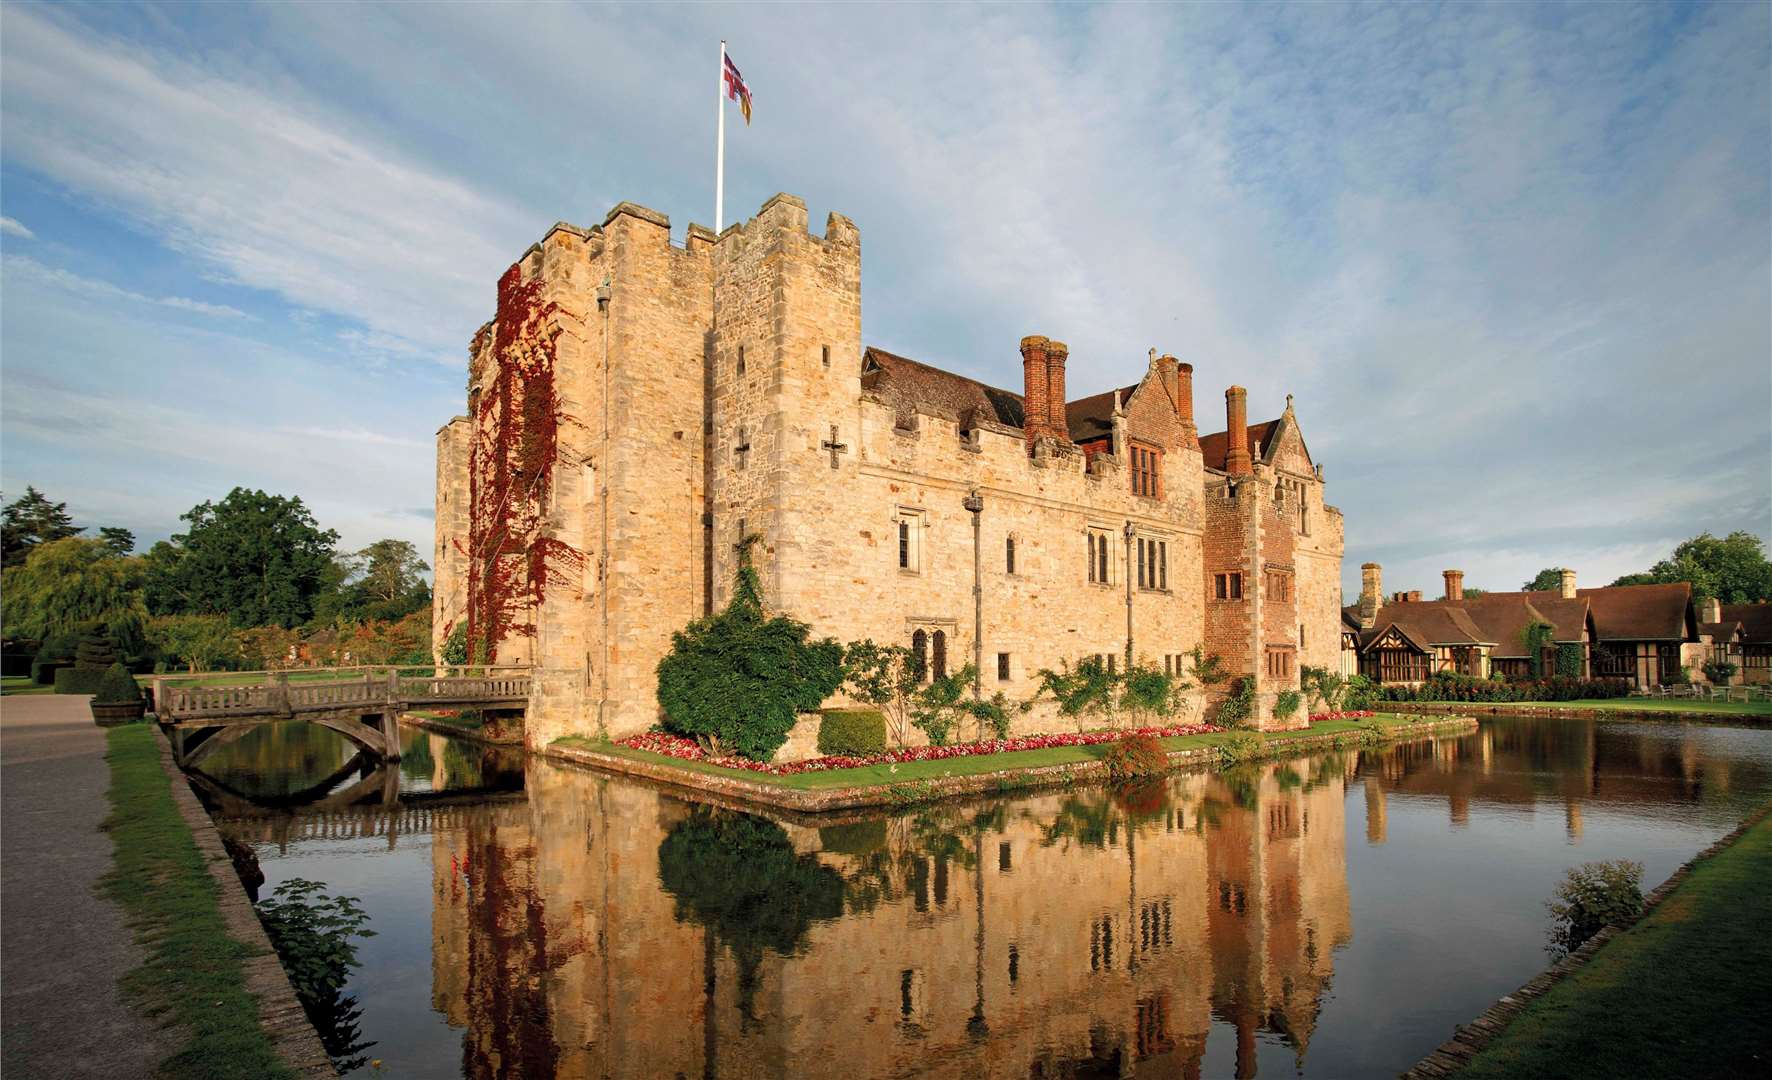 Hever Castle looks good all year round